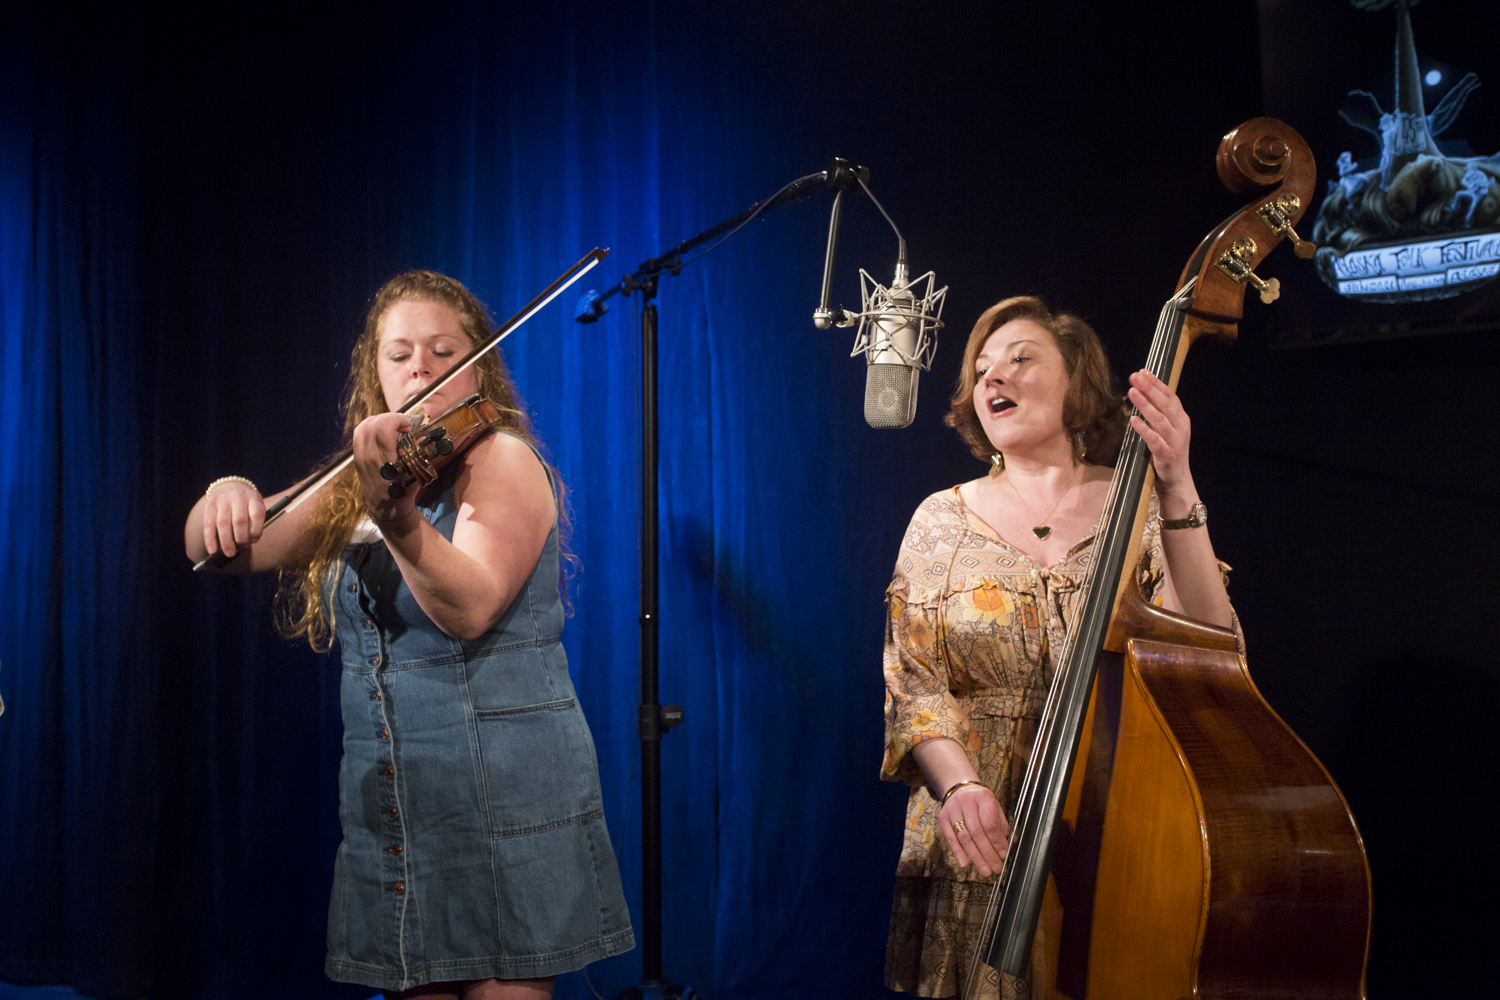 A woman plays violin while another woman playing upright bass sings into a microphone in a television studio.Katie Klan and Angela Brock of the Homer band Burnt Down House perform a Red Carpet Concert at KTOO Public Media during the 2019 Alaska Folk Festival. (Photo by Annie Bartholomew/KTOO)